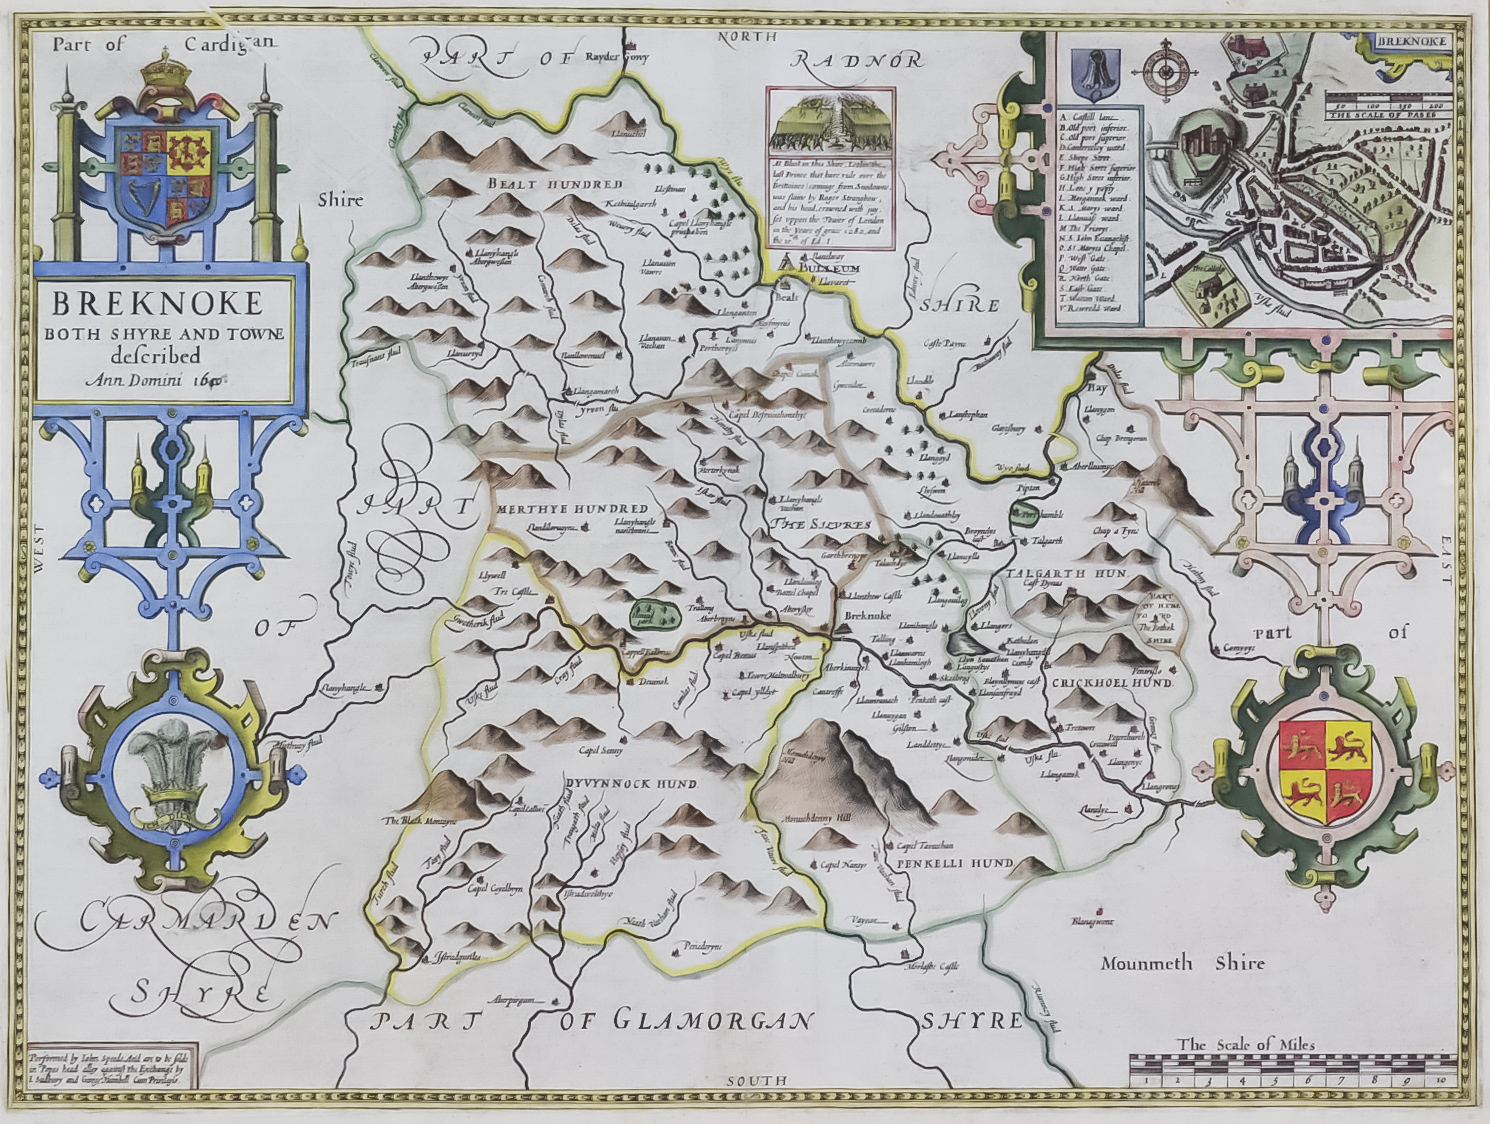 John Speed (1552-1629) - Coloured engraving - "Breknoke, both Shyre and Towne descibed" with plan of